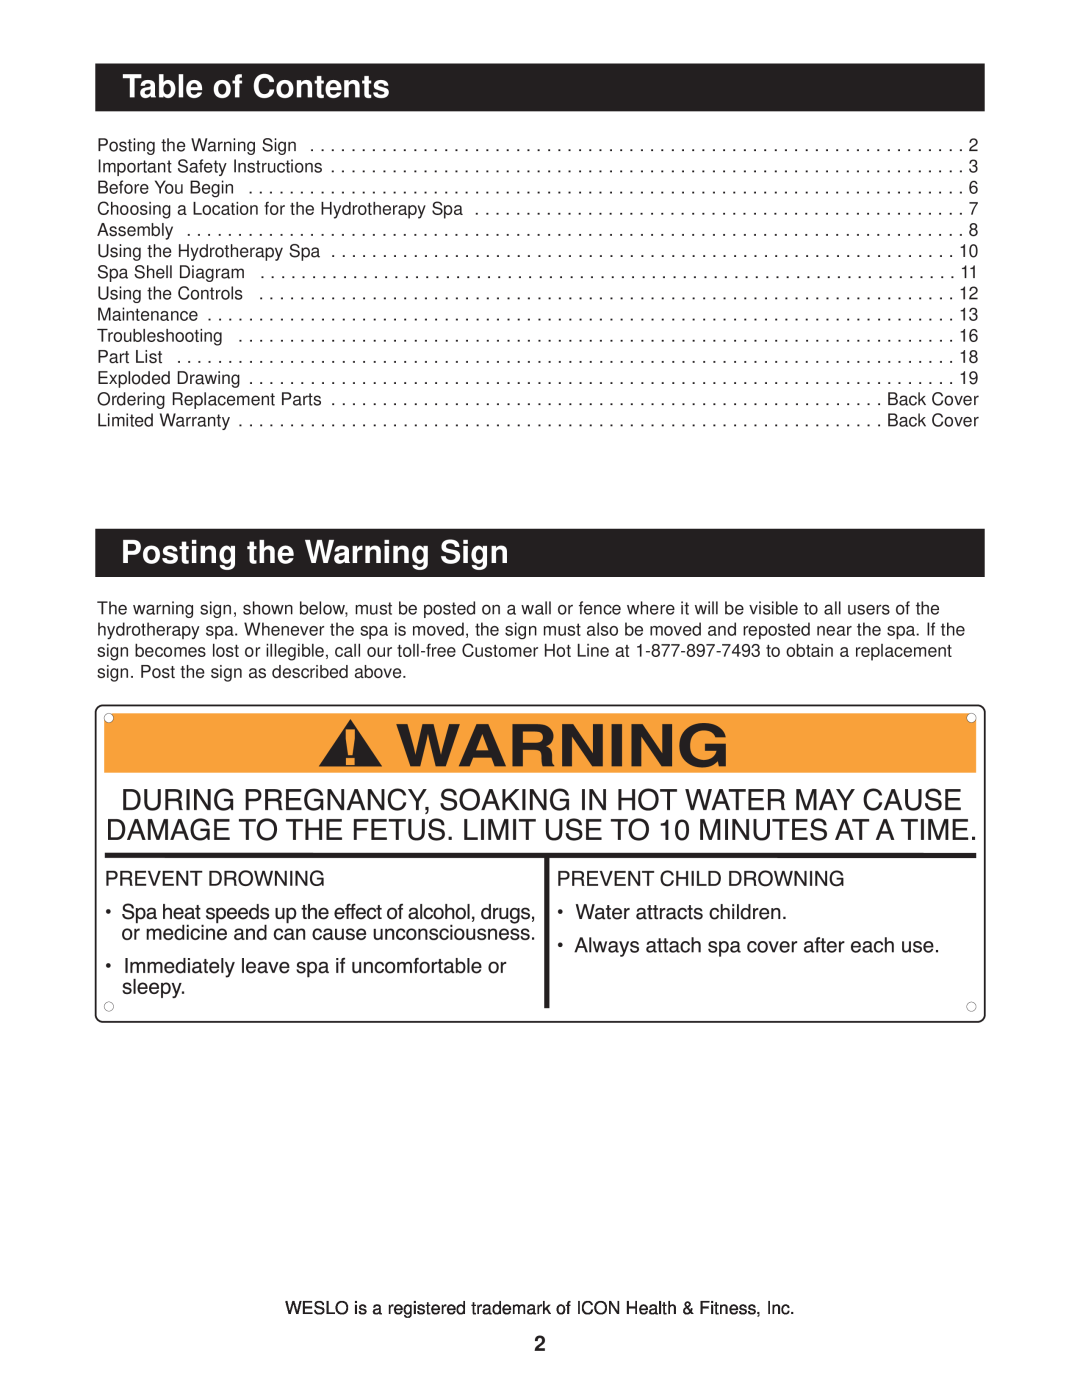 Image IMSG62820 Table of Contents, Posting the Warning Sign, WESLO is a registered trademark of ICON Health & Fitness, Inc 